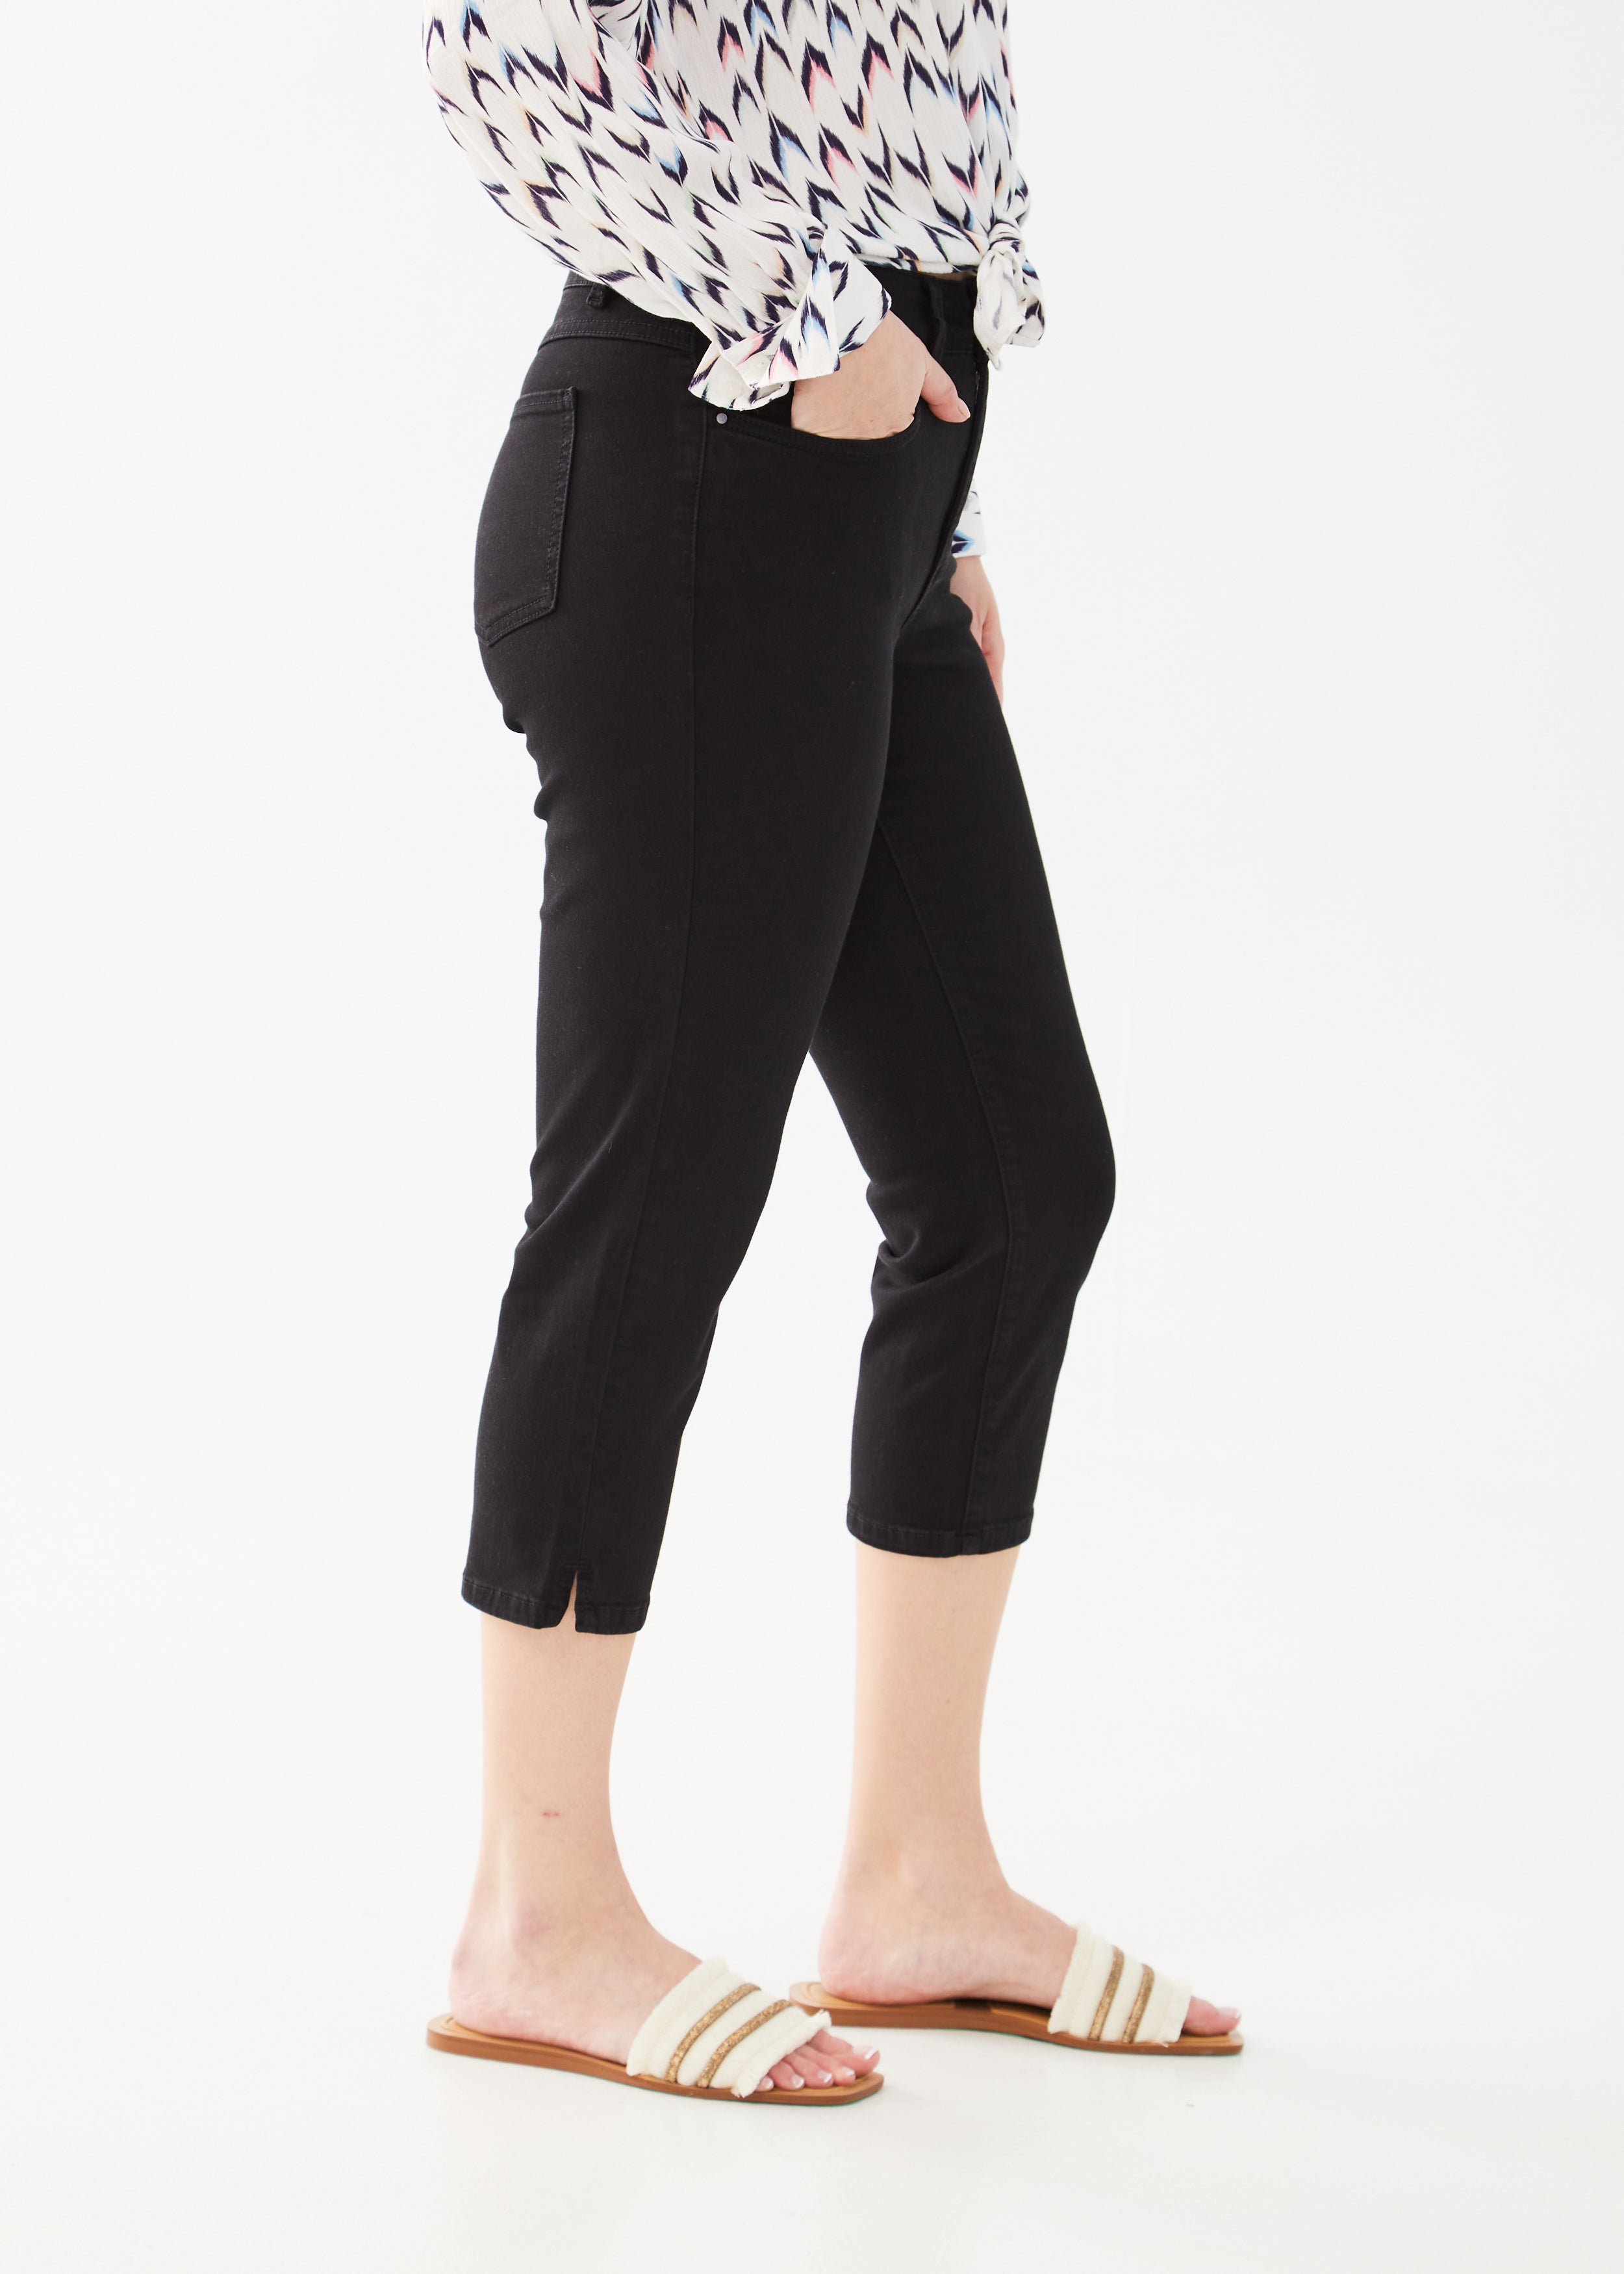 Introducing the FDJ Olivia Slim Capri, a versatile addition to your wardrobe. With 5 pockets, you'll have plenty of space for essentials on-the-go. The classic black colour ensures effortless coordination with any outfit. Elevate your style with these must-have capris.